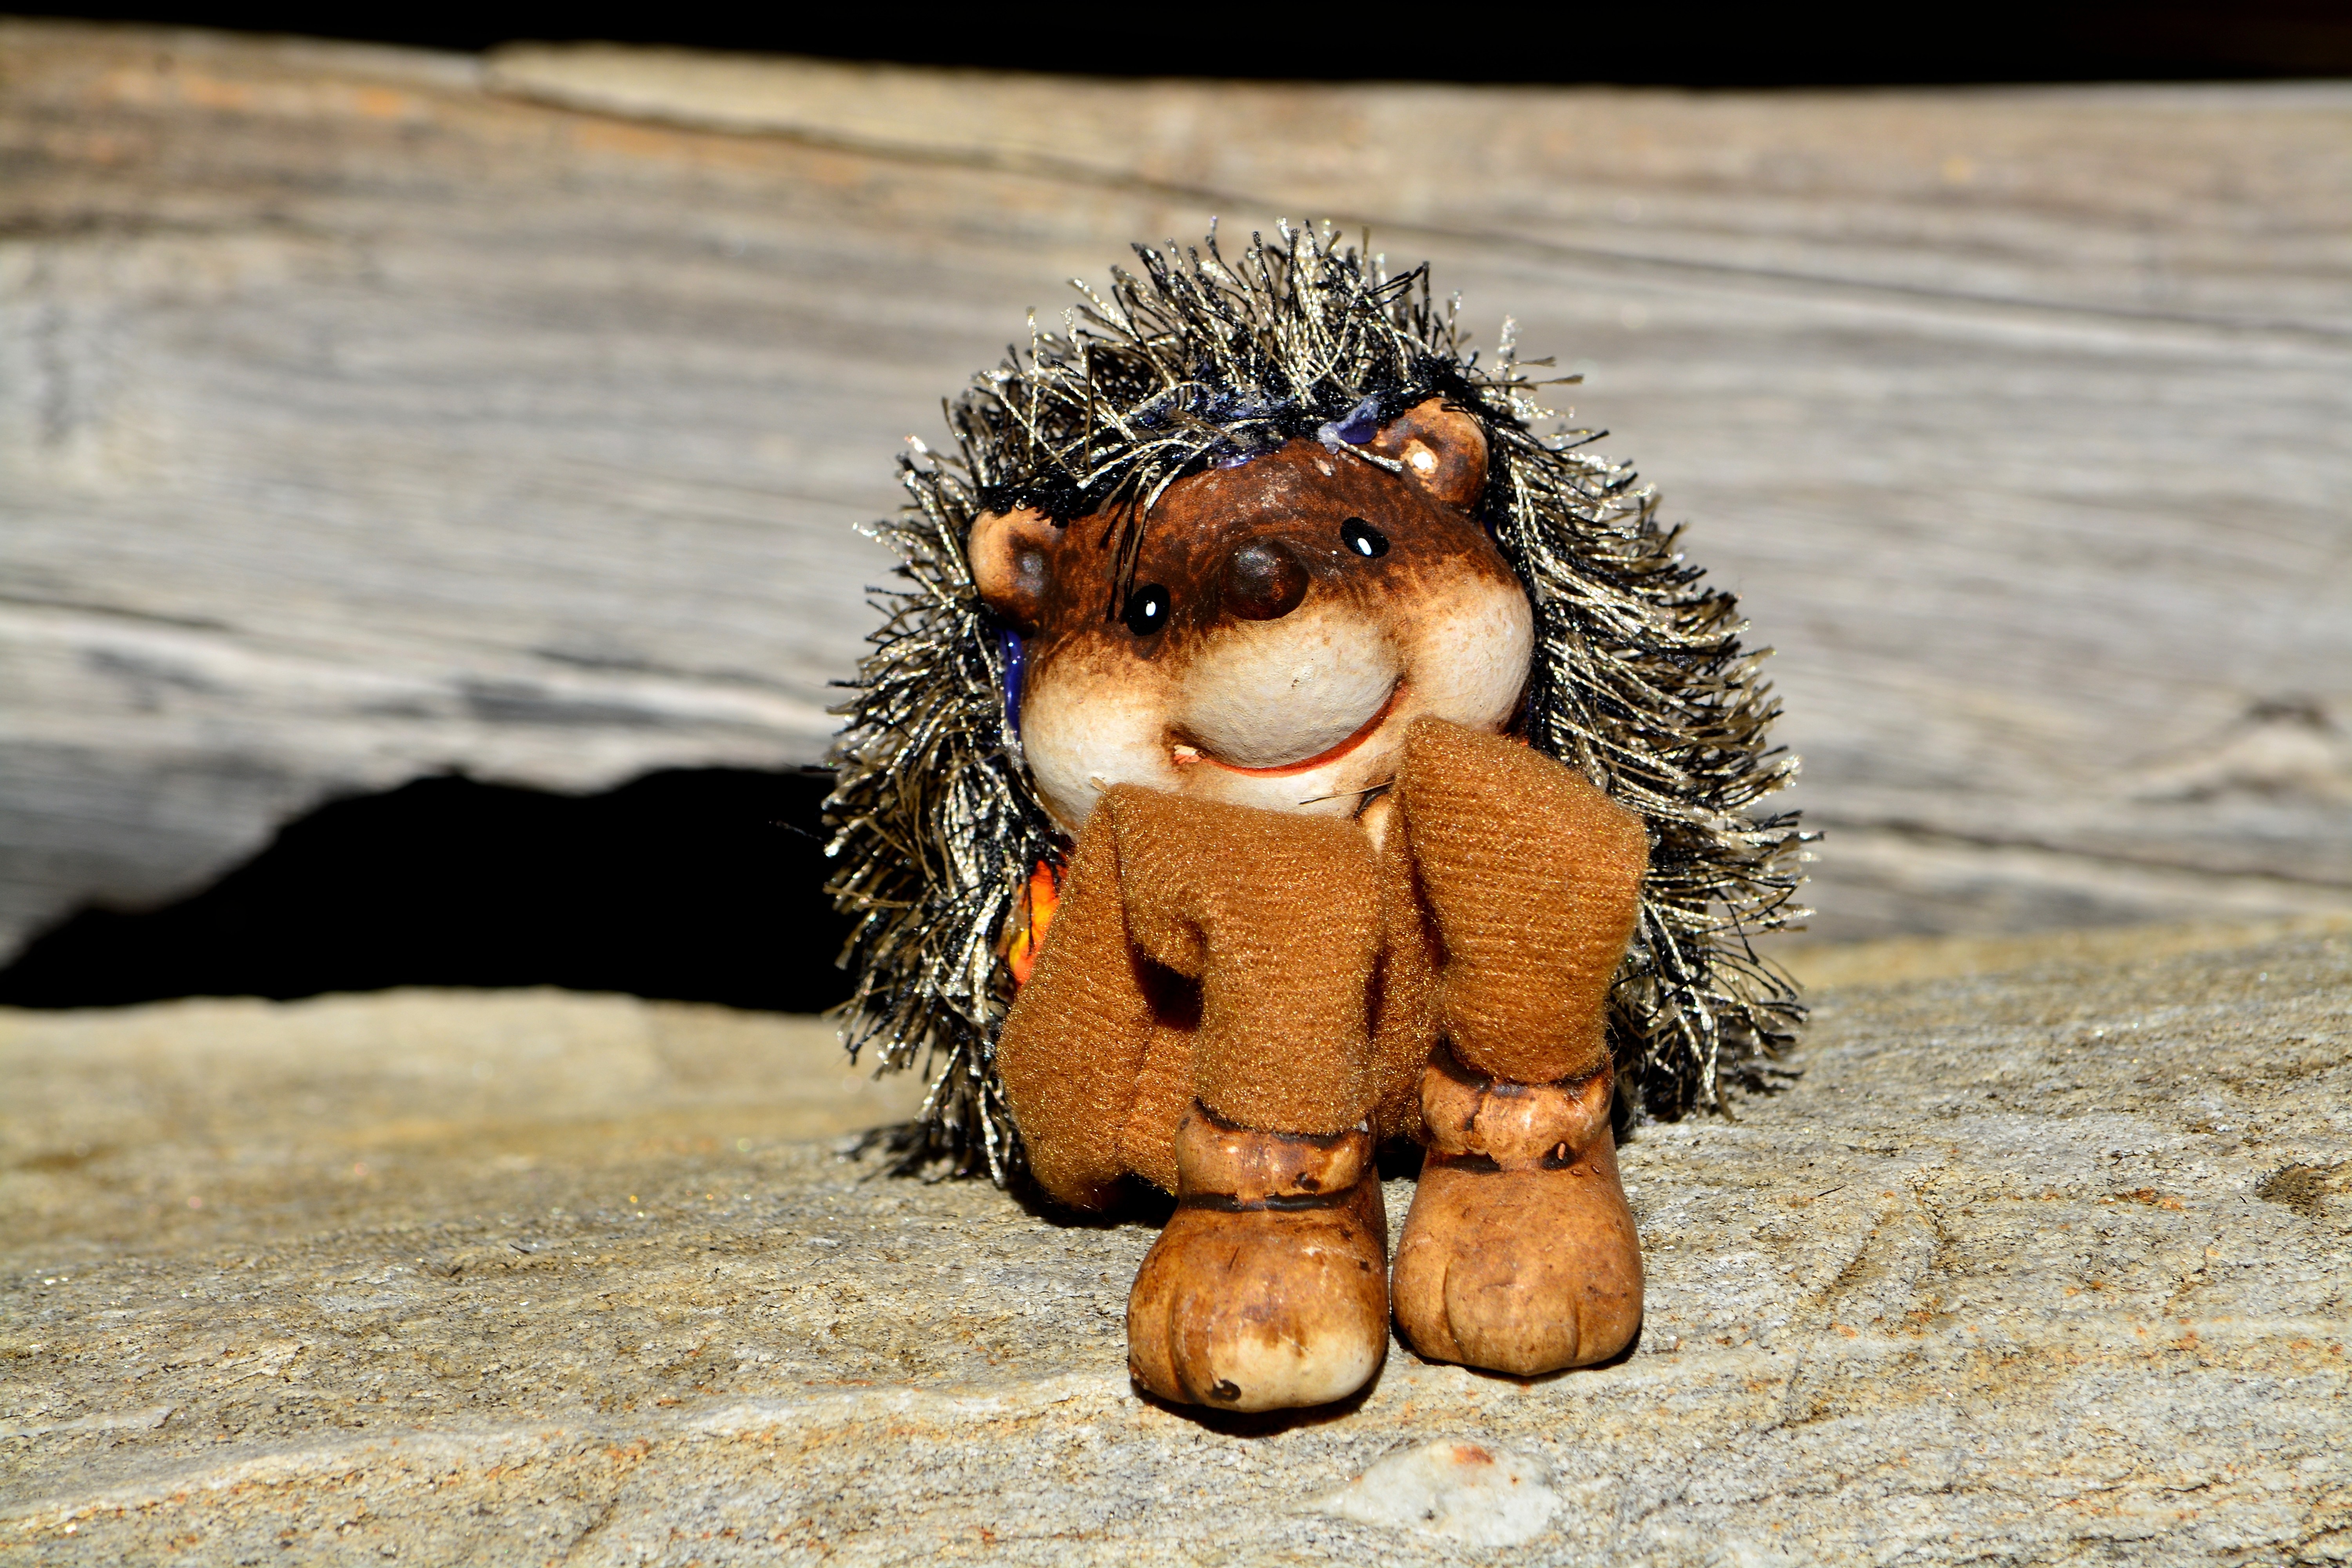 hedgehog plush toy on wooden surface